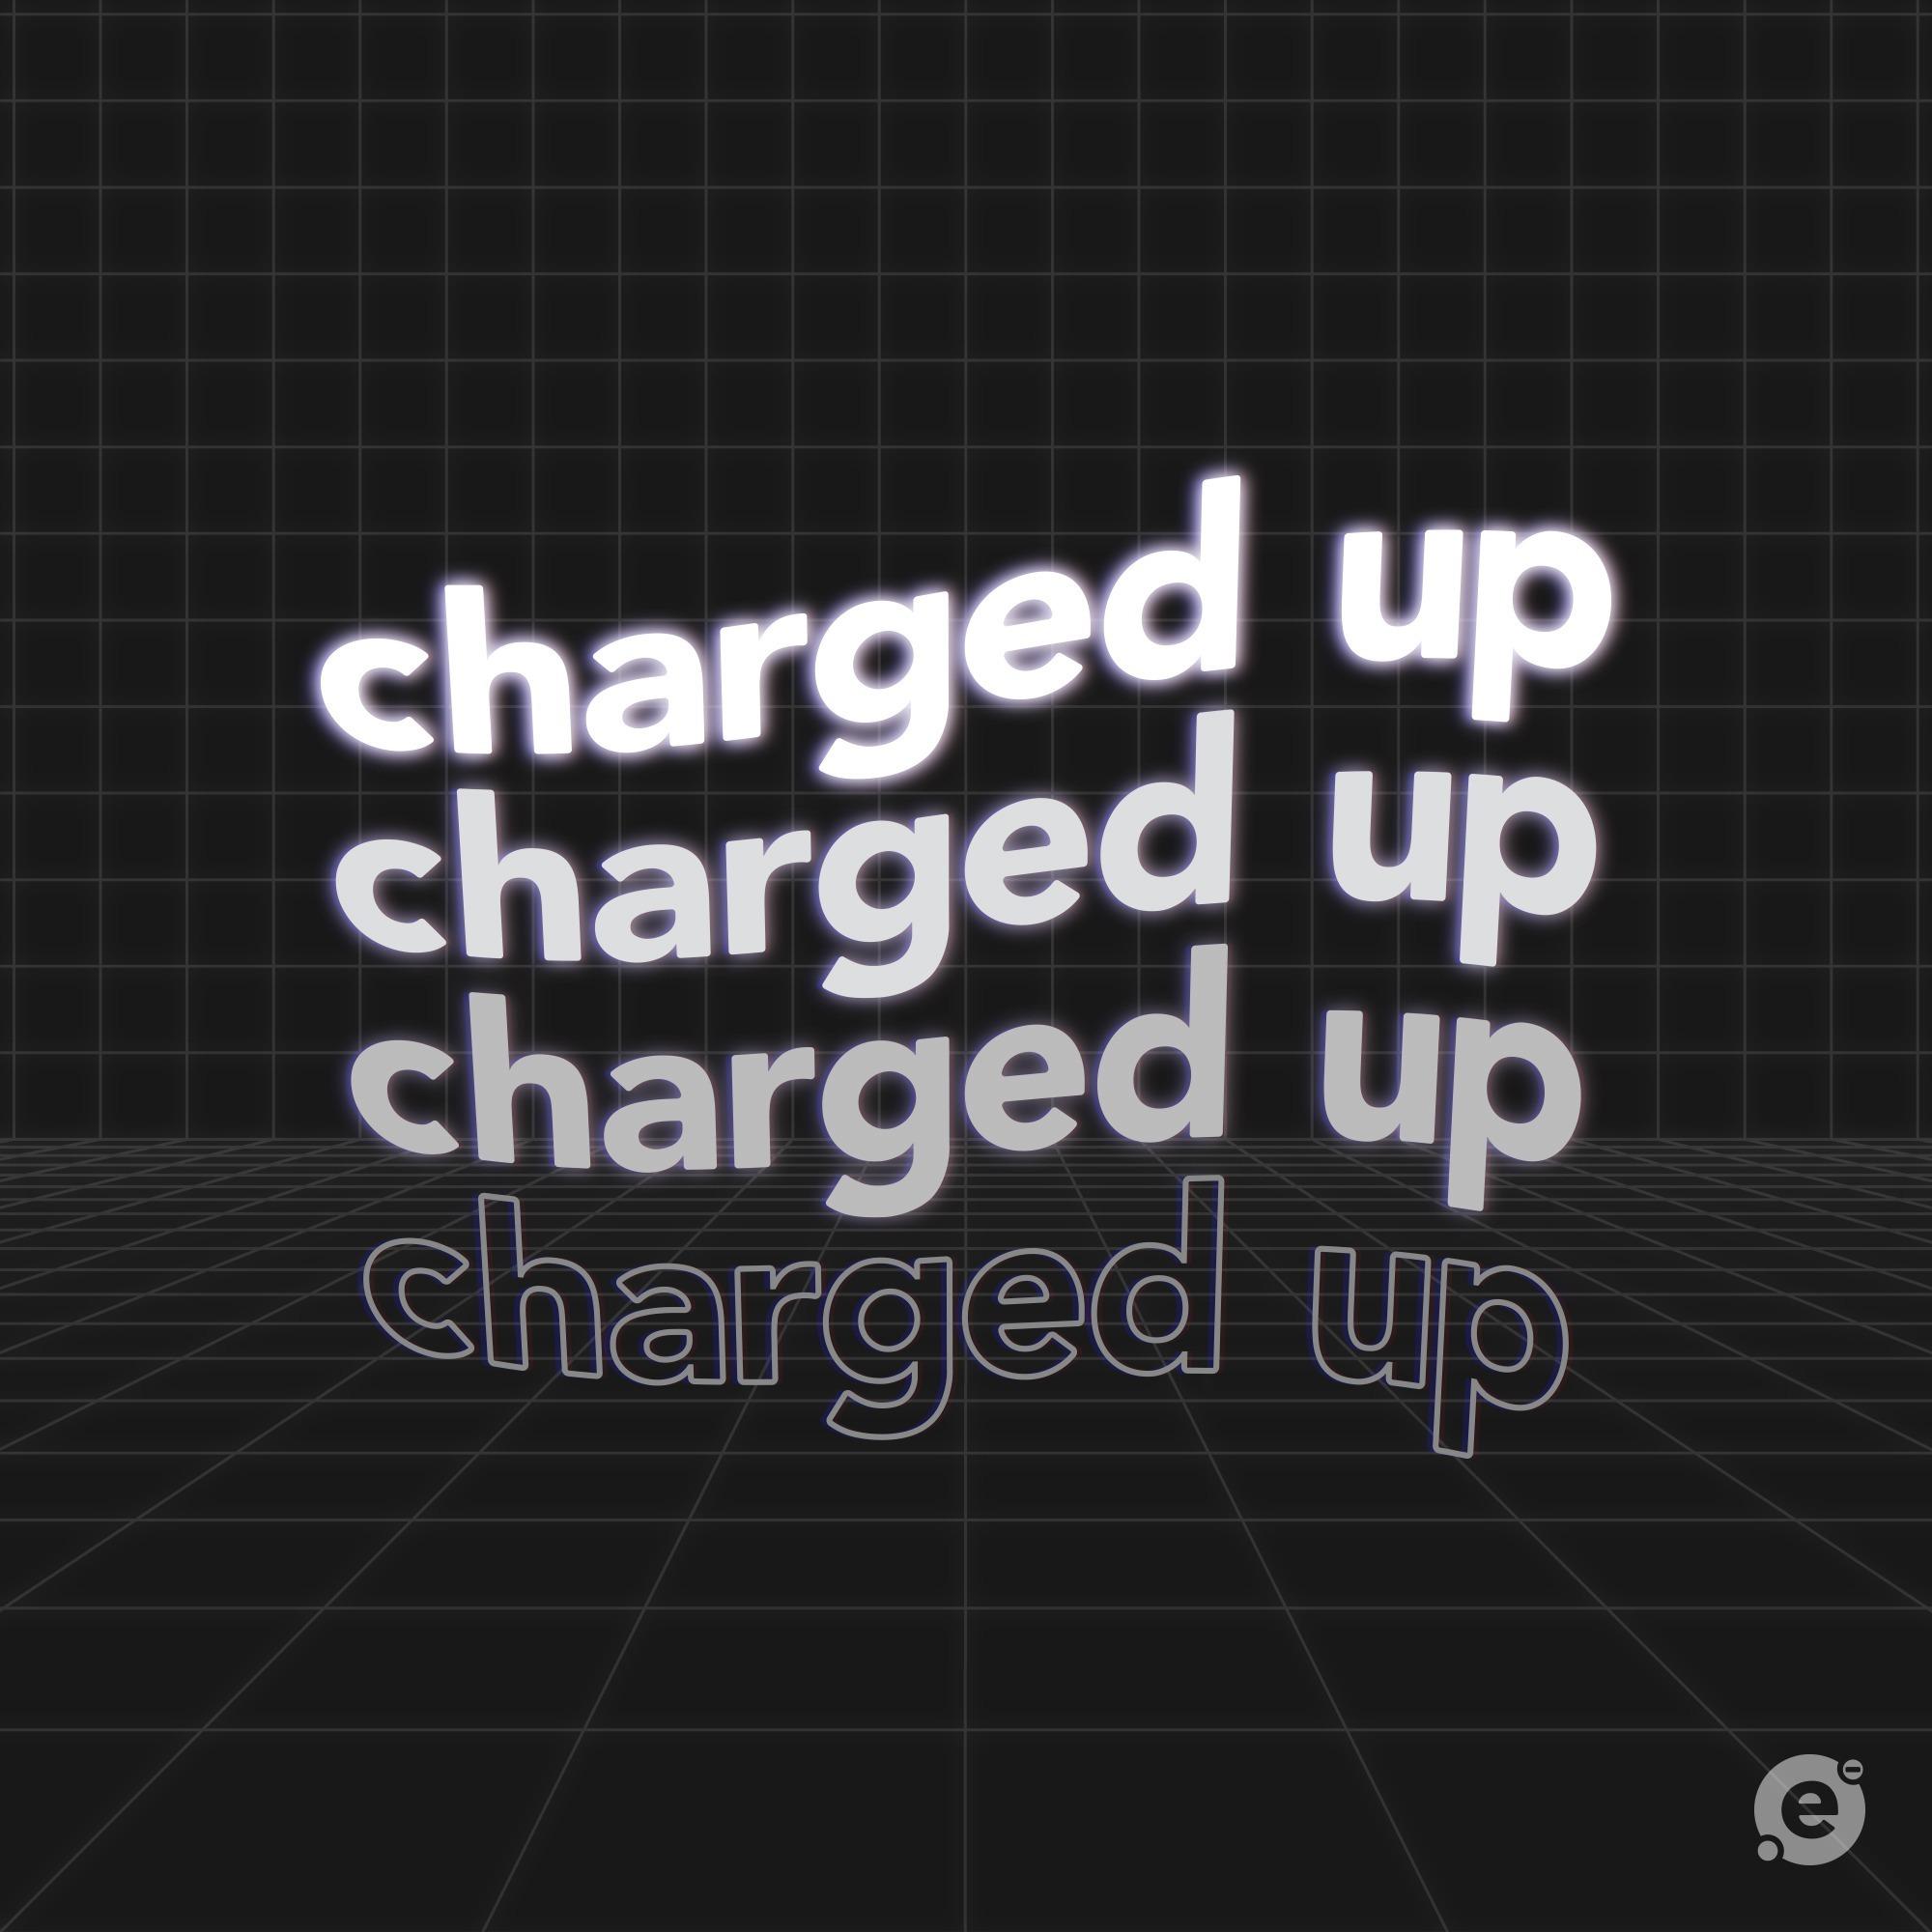 Charged Up!